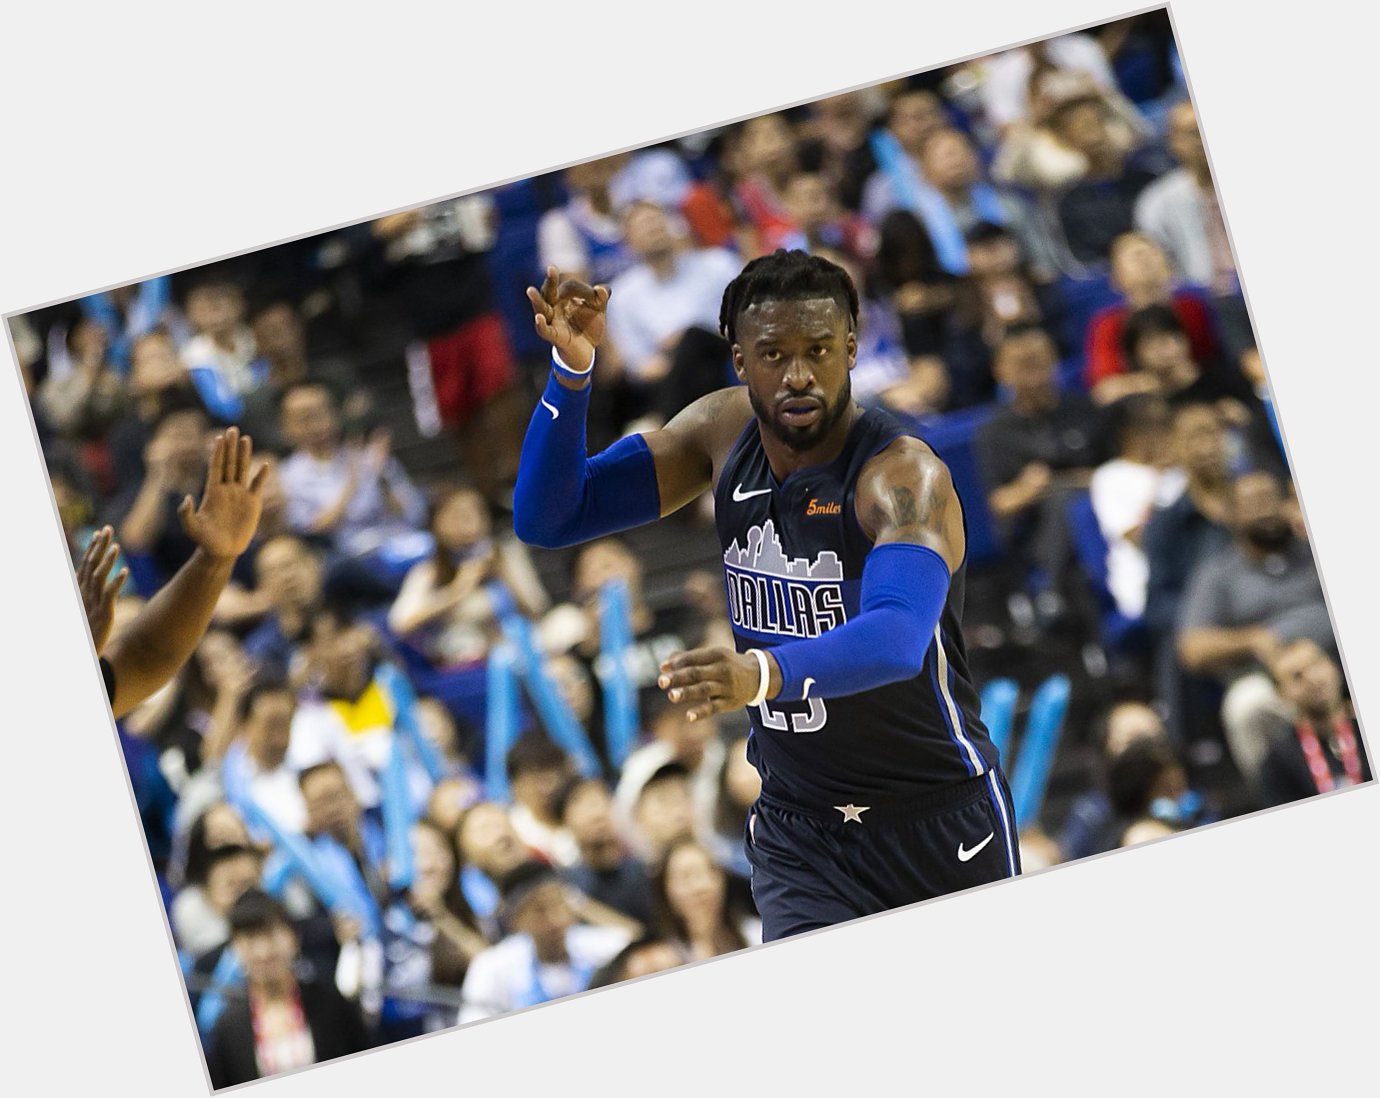 Calling all to wish Wesley Matthews a happy 32nd birthday! 